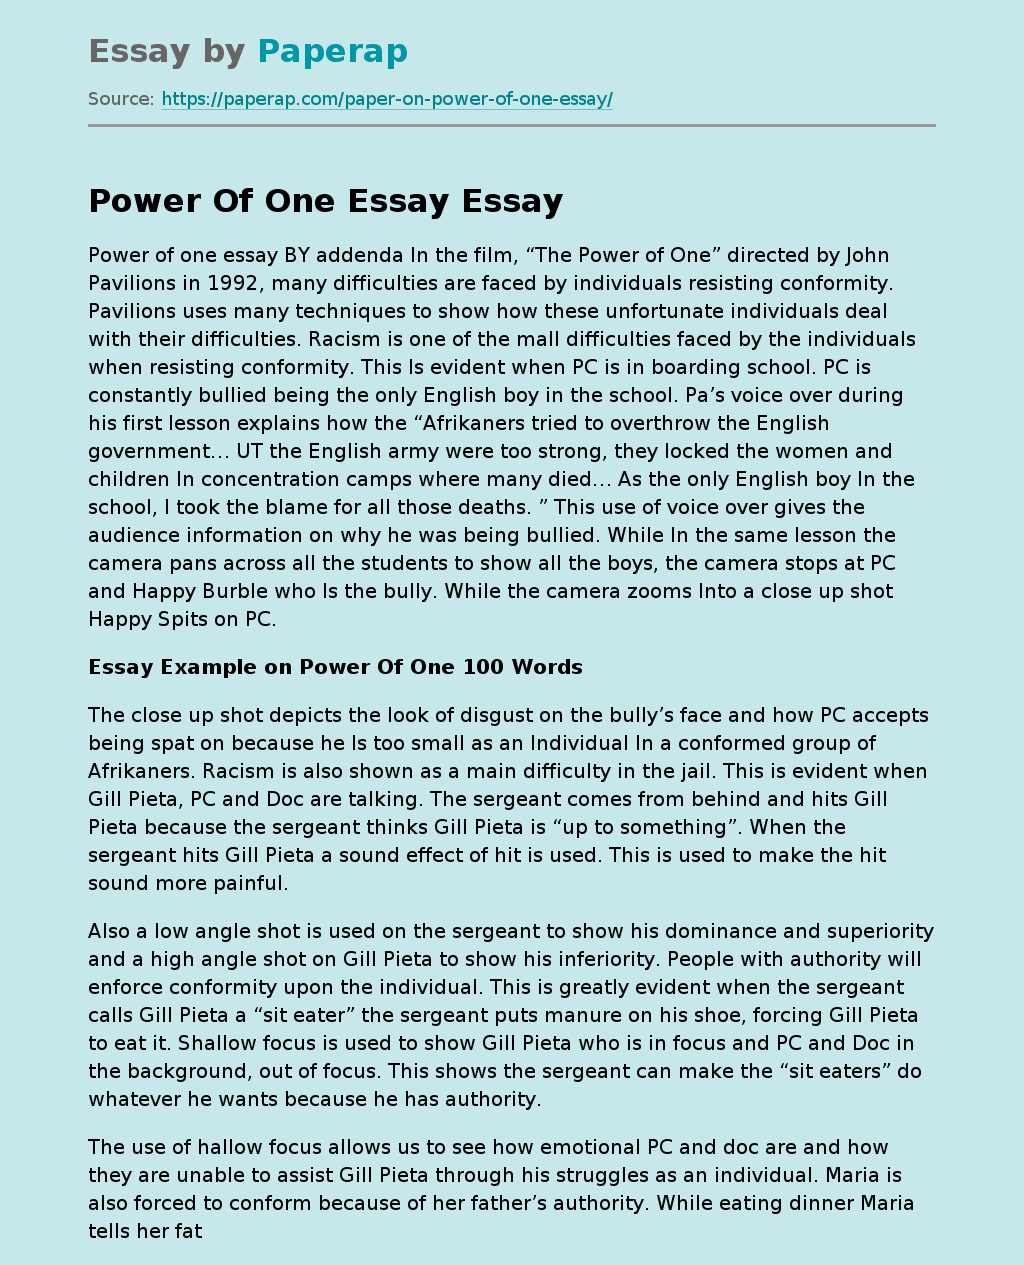 Power Of One Essay